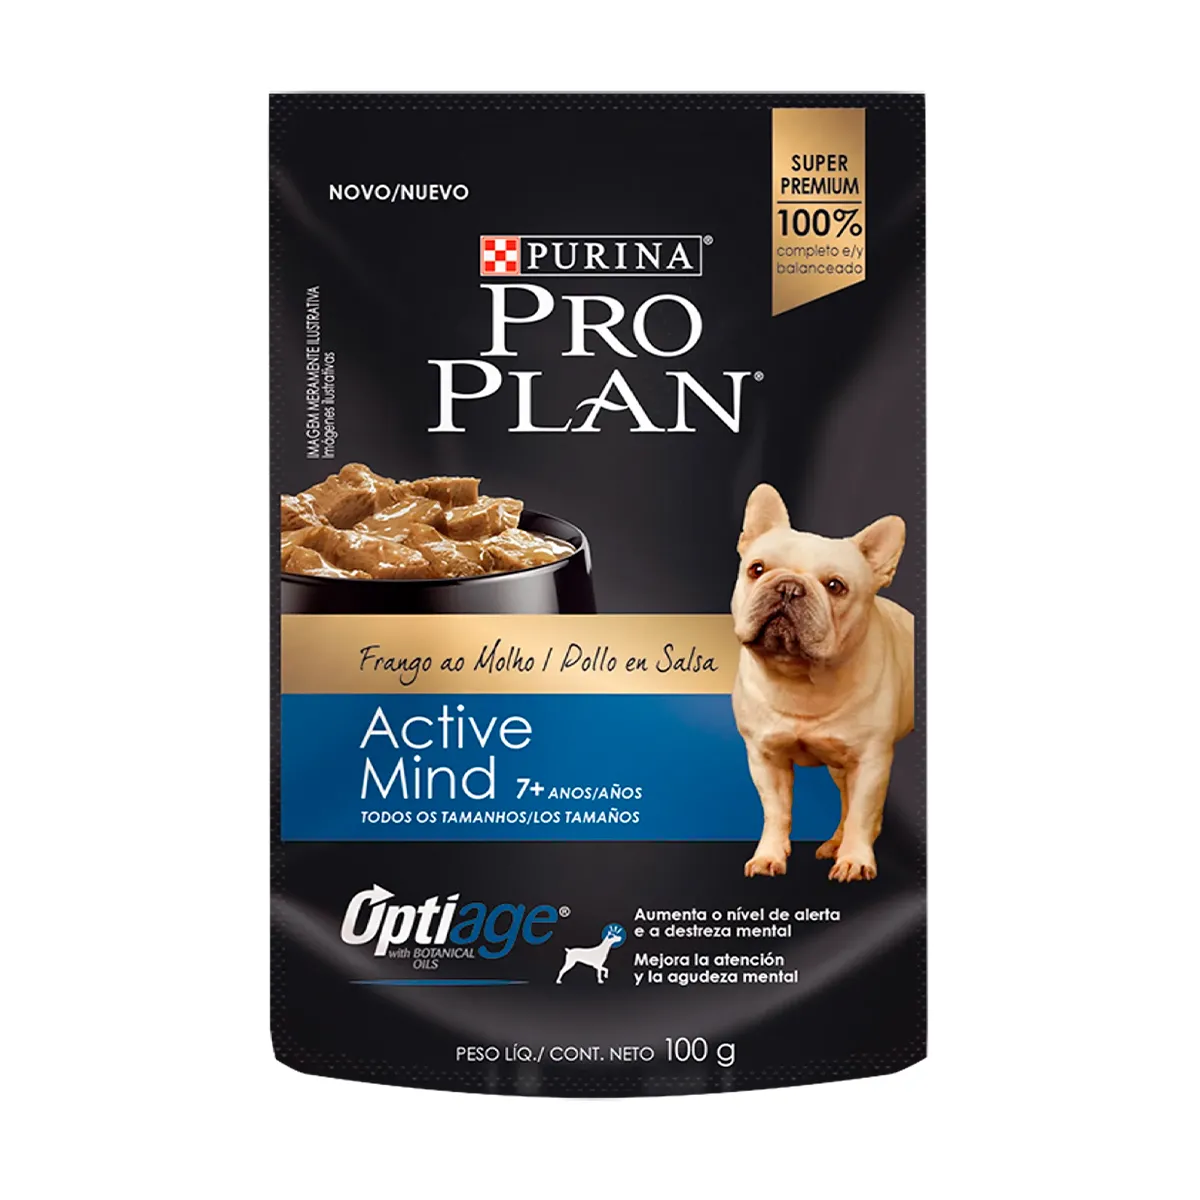 purina-pro-plan-pouch-perro-active-mind.jpg